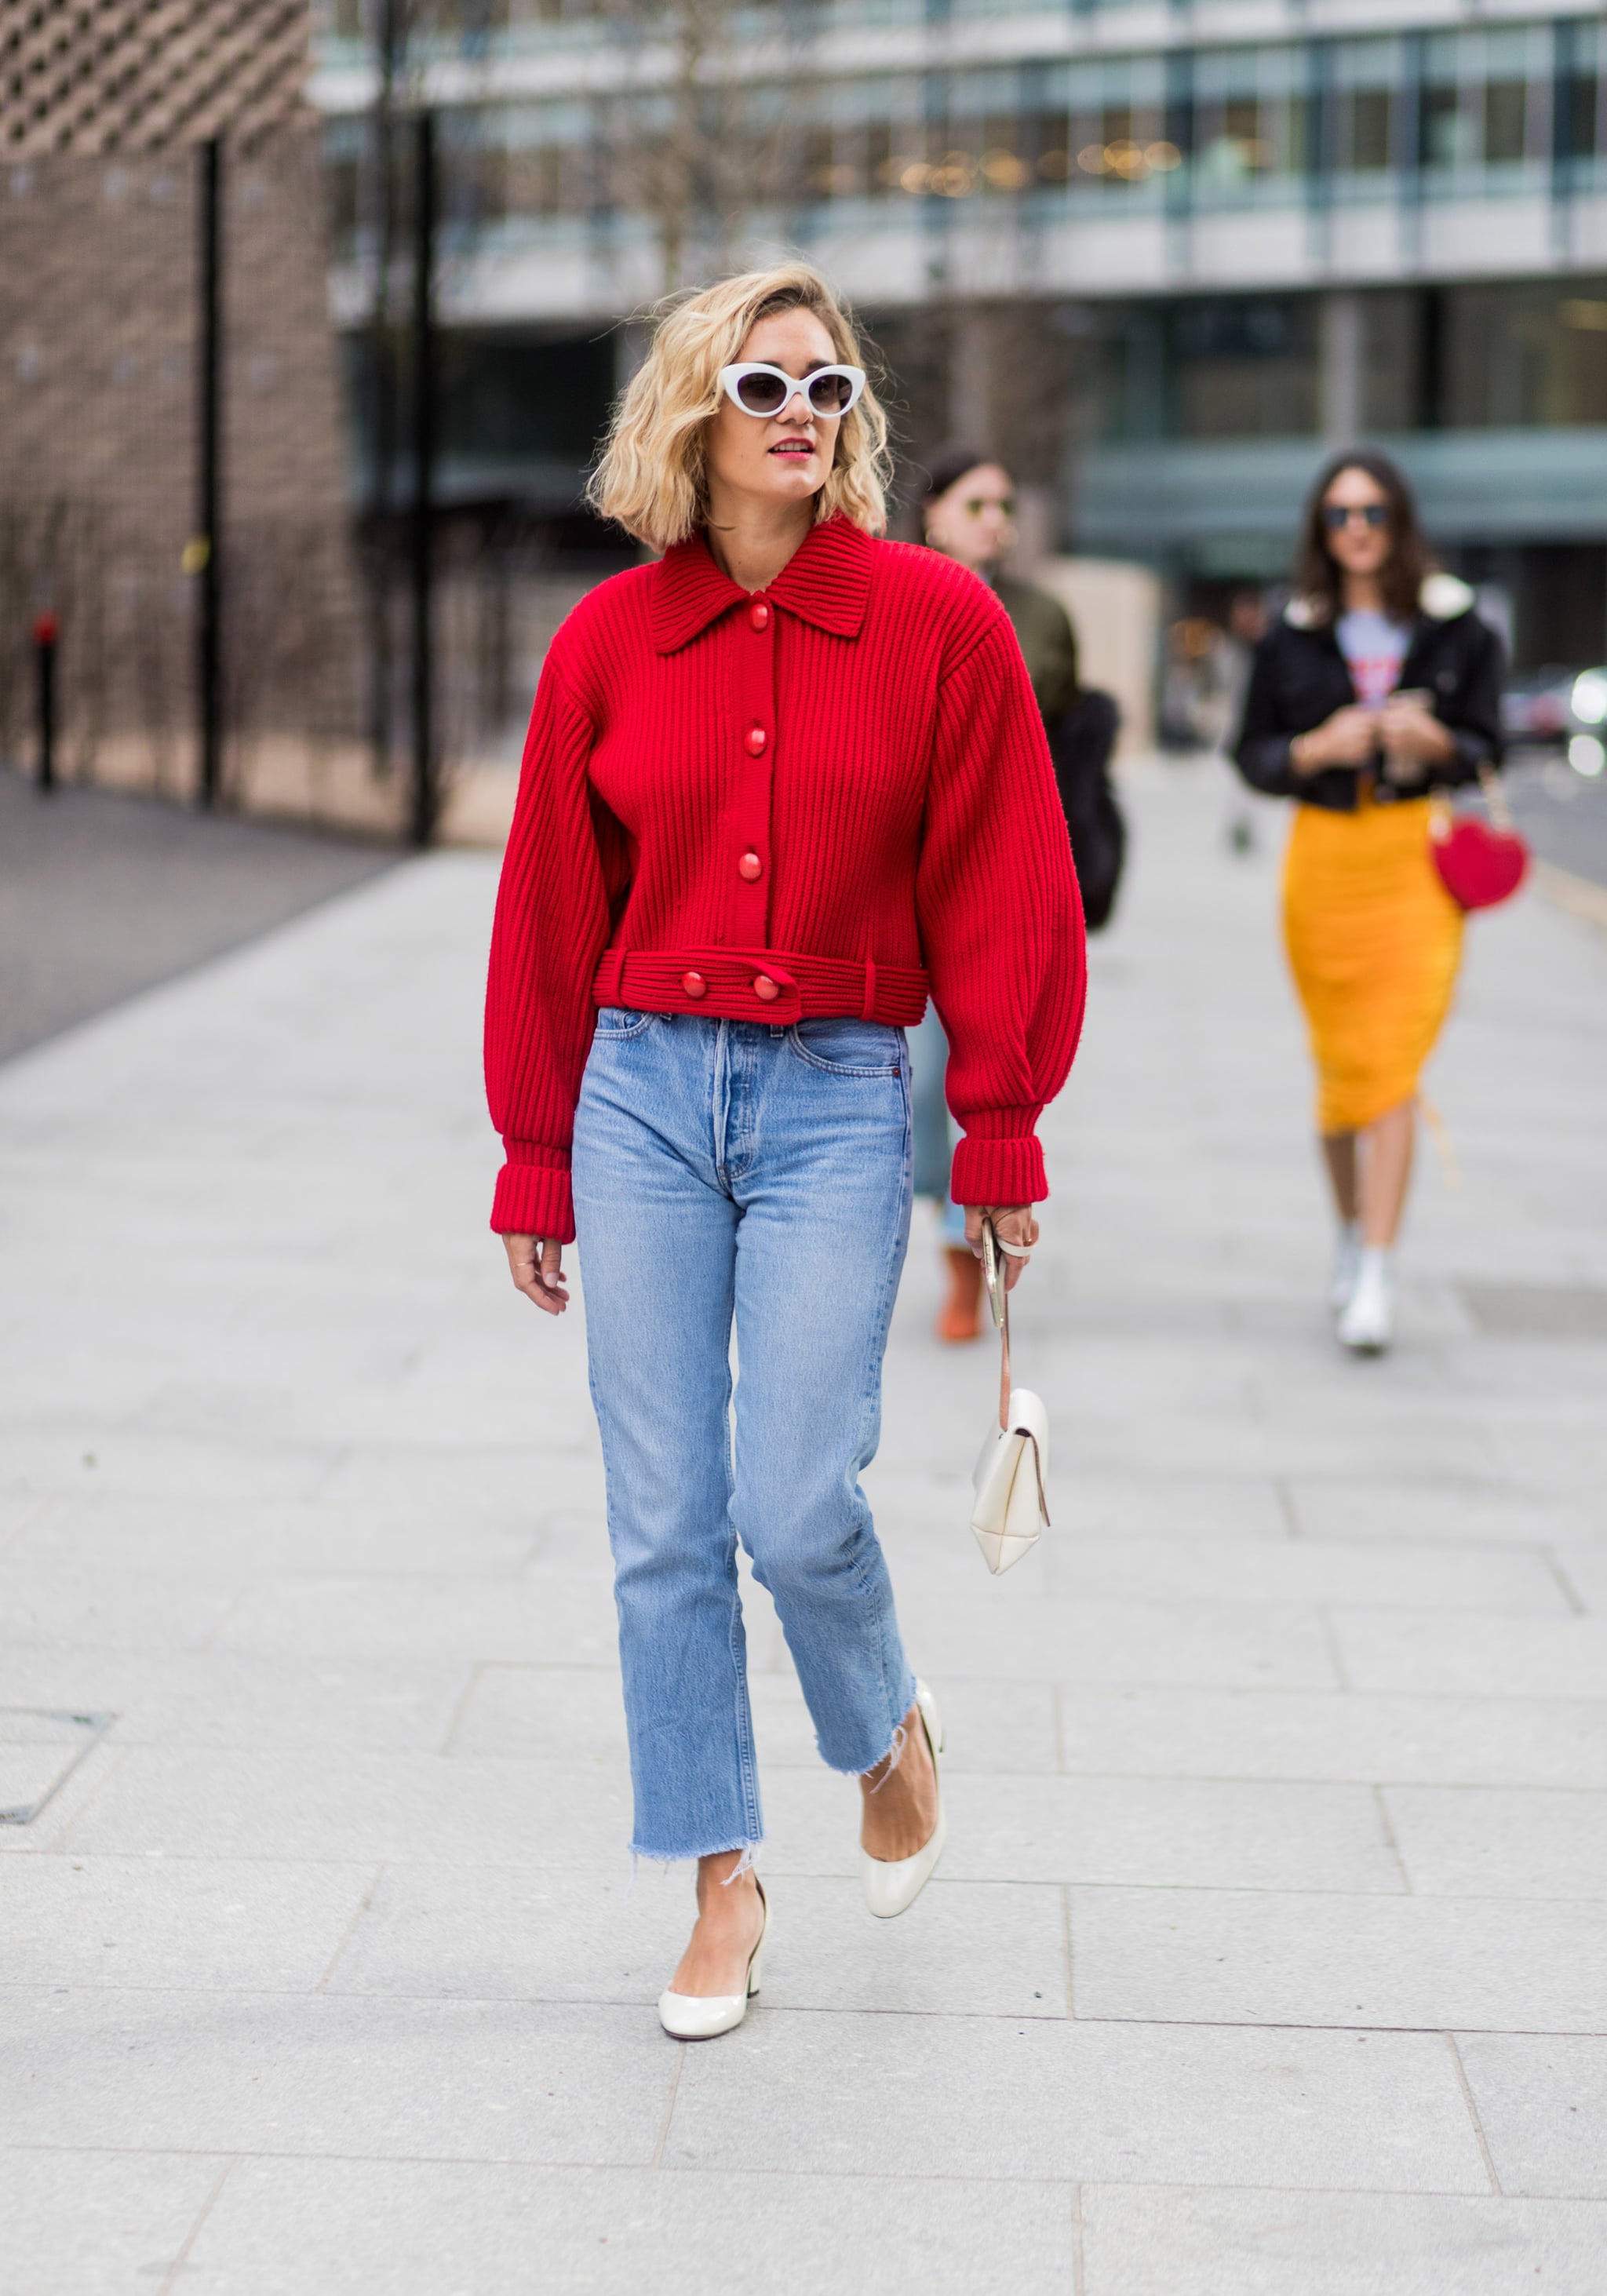 High-Waisted Mom Jeans and a Colourful Jacket | 34 Outfit Ideas That You'll  Love Wearing This Fall | POPSUGAR Fashion Photo 8